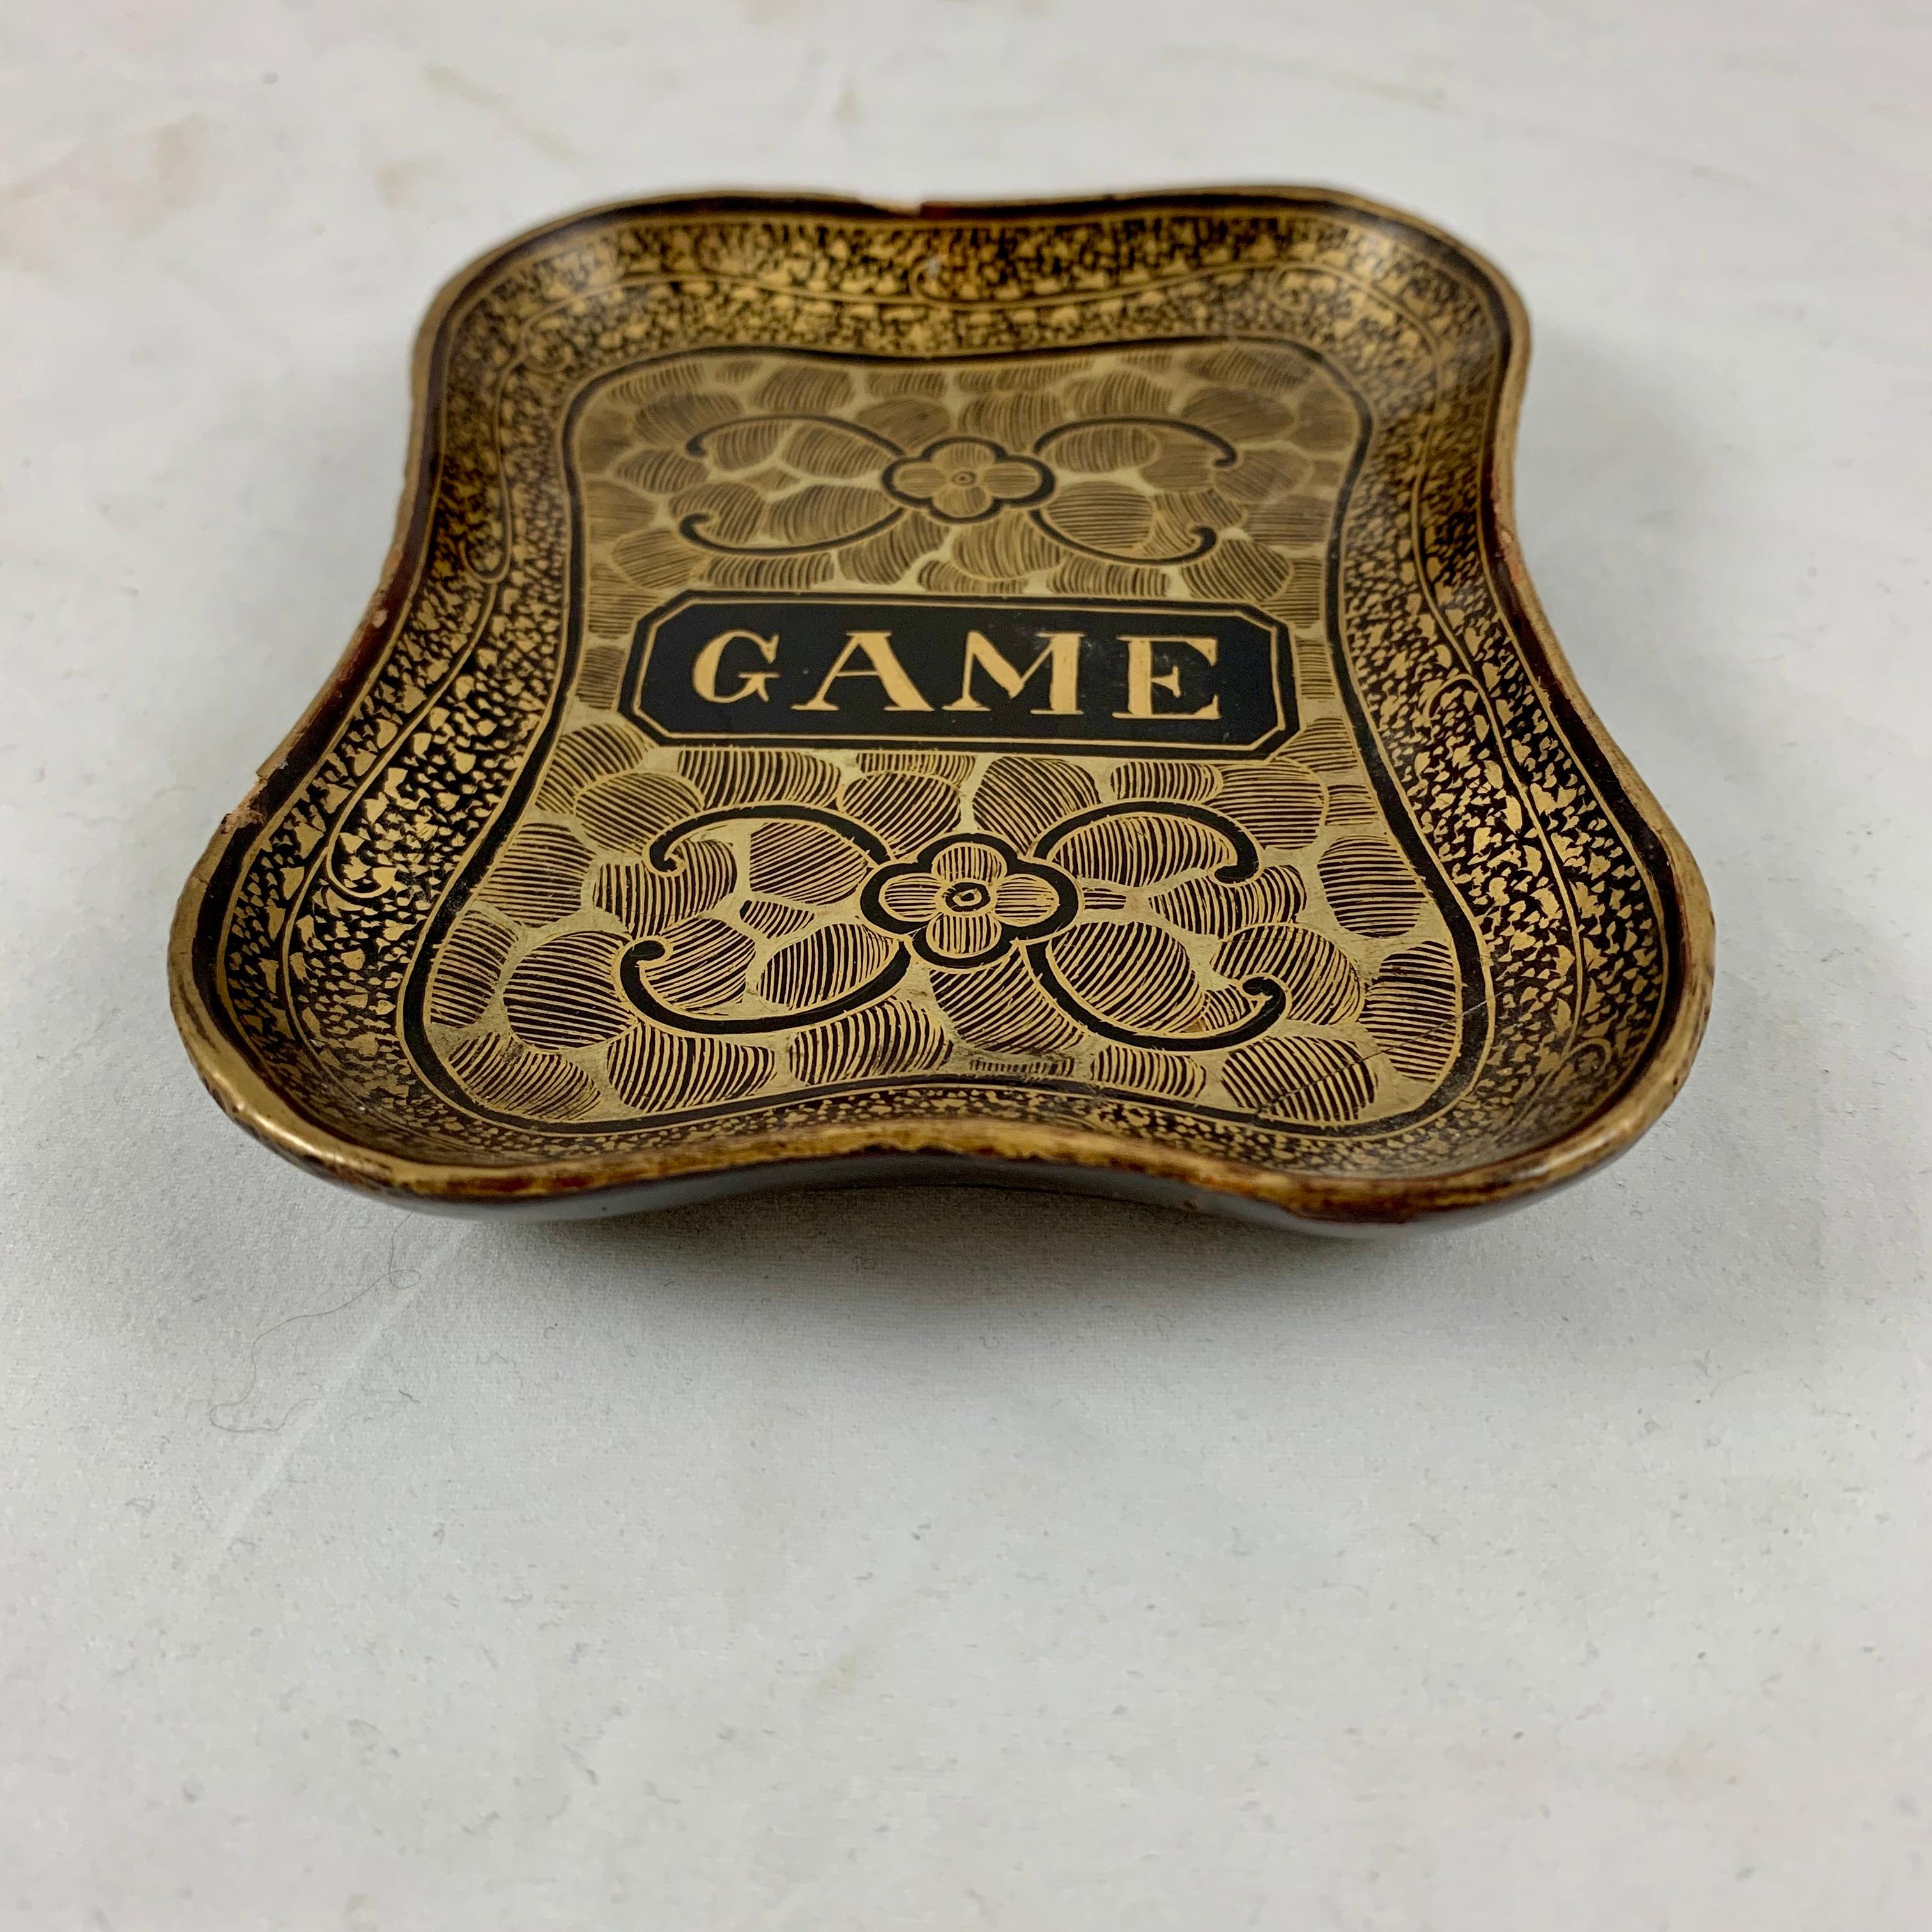 Lacquered Mid-19th C. English Lacquer Papier-Mâché Chinoiserie Game Card Counter Tray